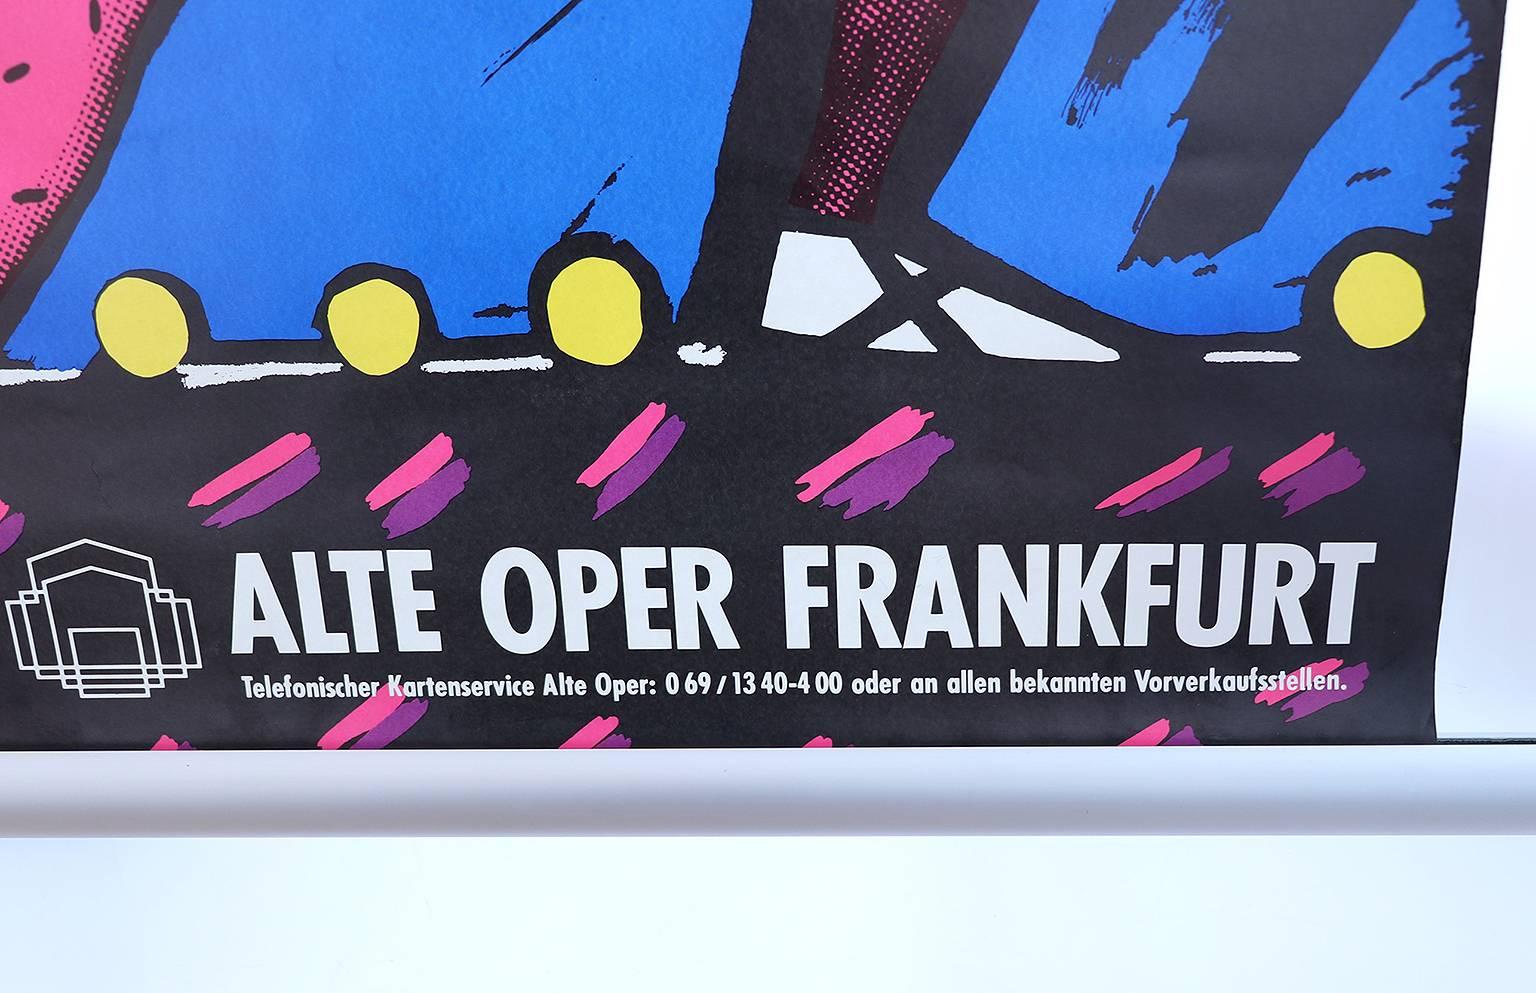 Dance Dance Dance - a German poster from Alte Oper Franfurt, 1991.
Not framed, has not been folded, rolled up.
Size DIN A1: 594 x 841 mm
Two identical posters are available. 